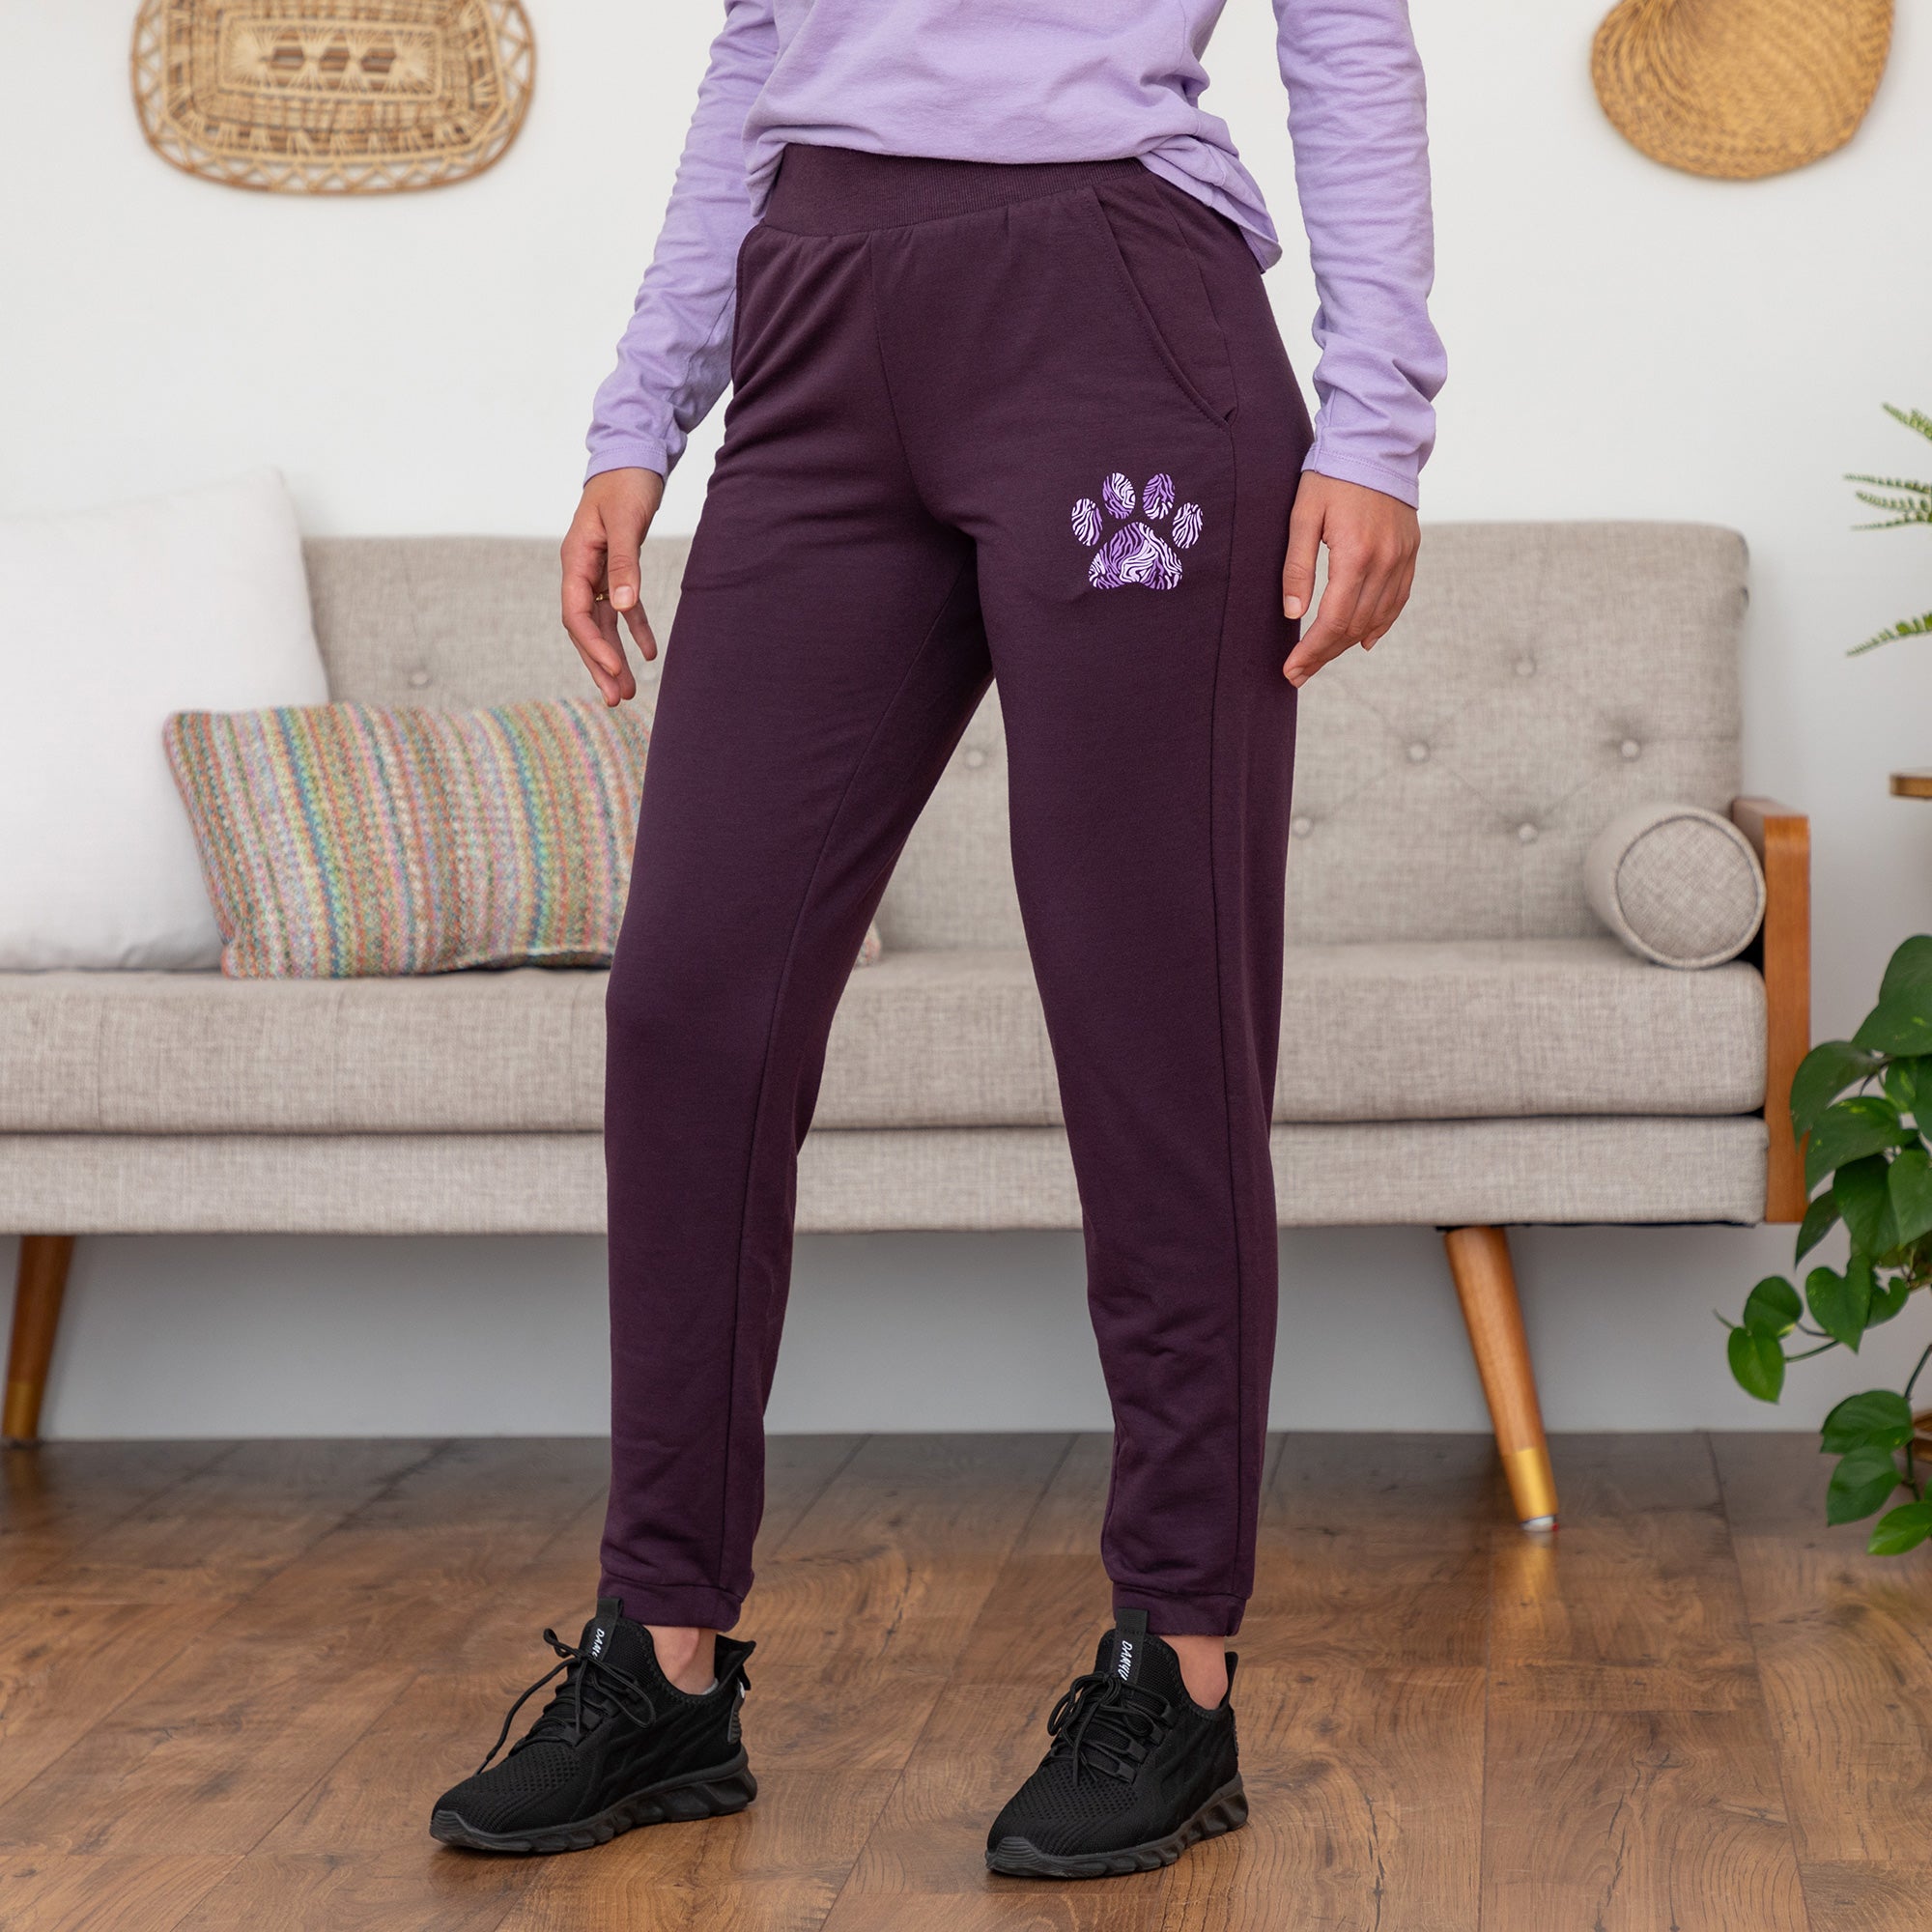 Paw Print Lightweight Tapered Sweatpants With Pockets & Elastic Waist - 1X